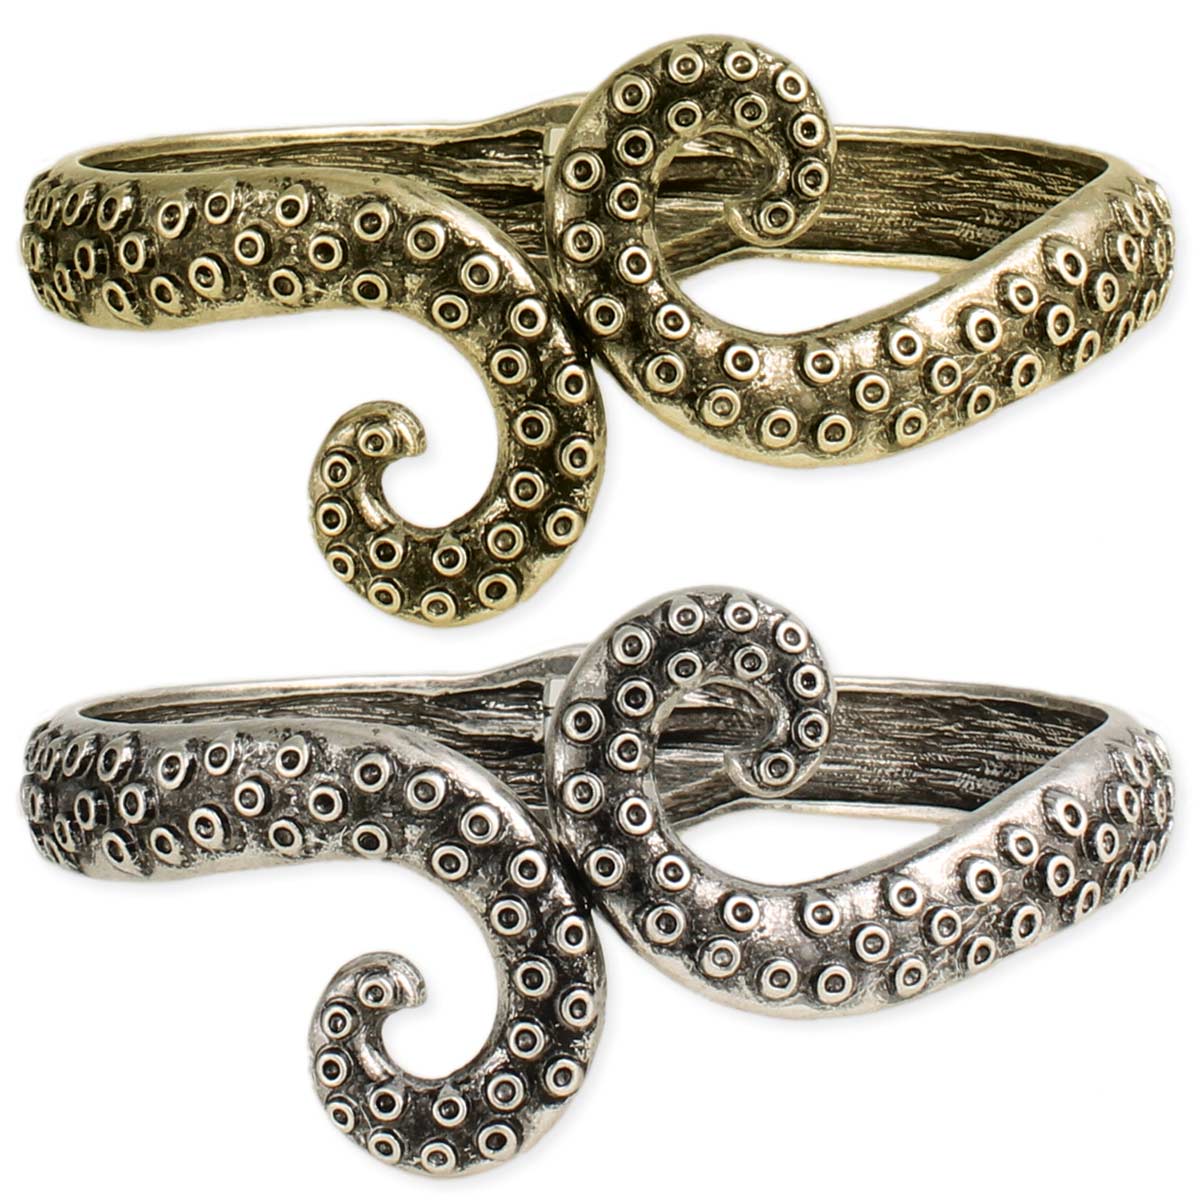 Antiqued From The Deep Octopus Tentacle Cuff